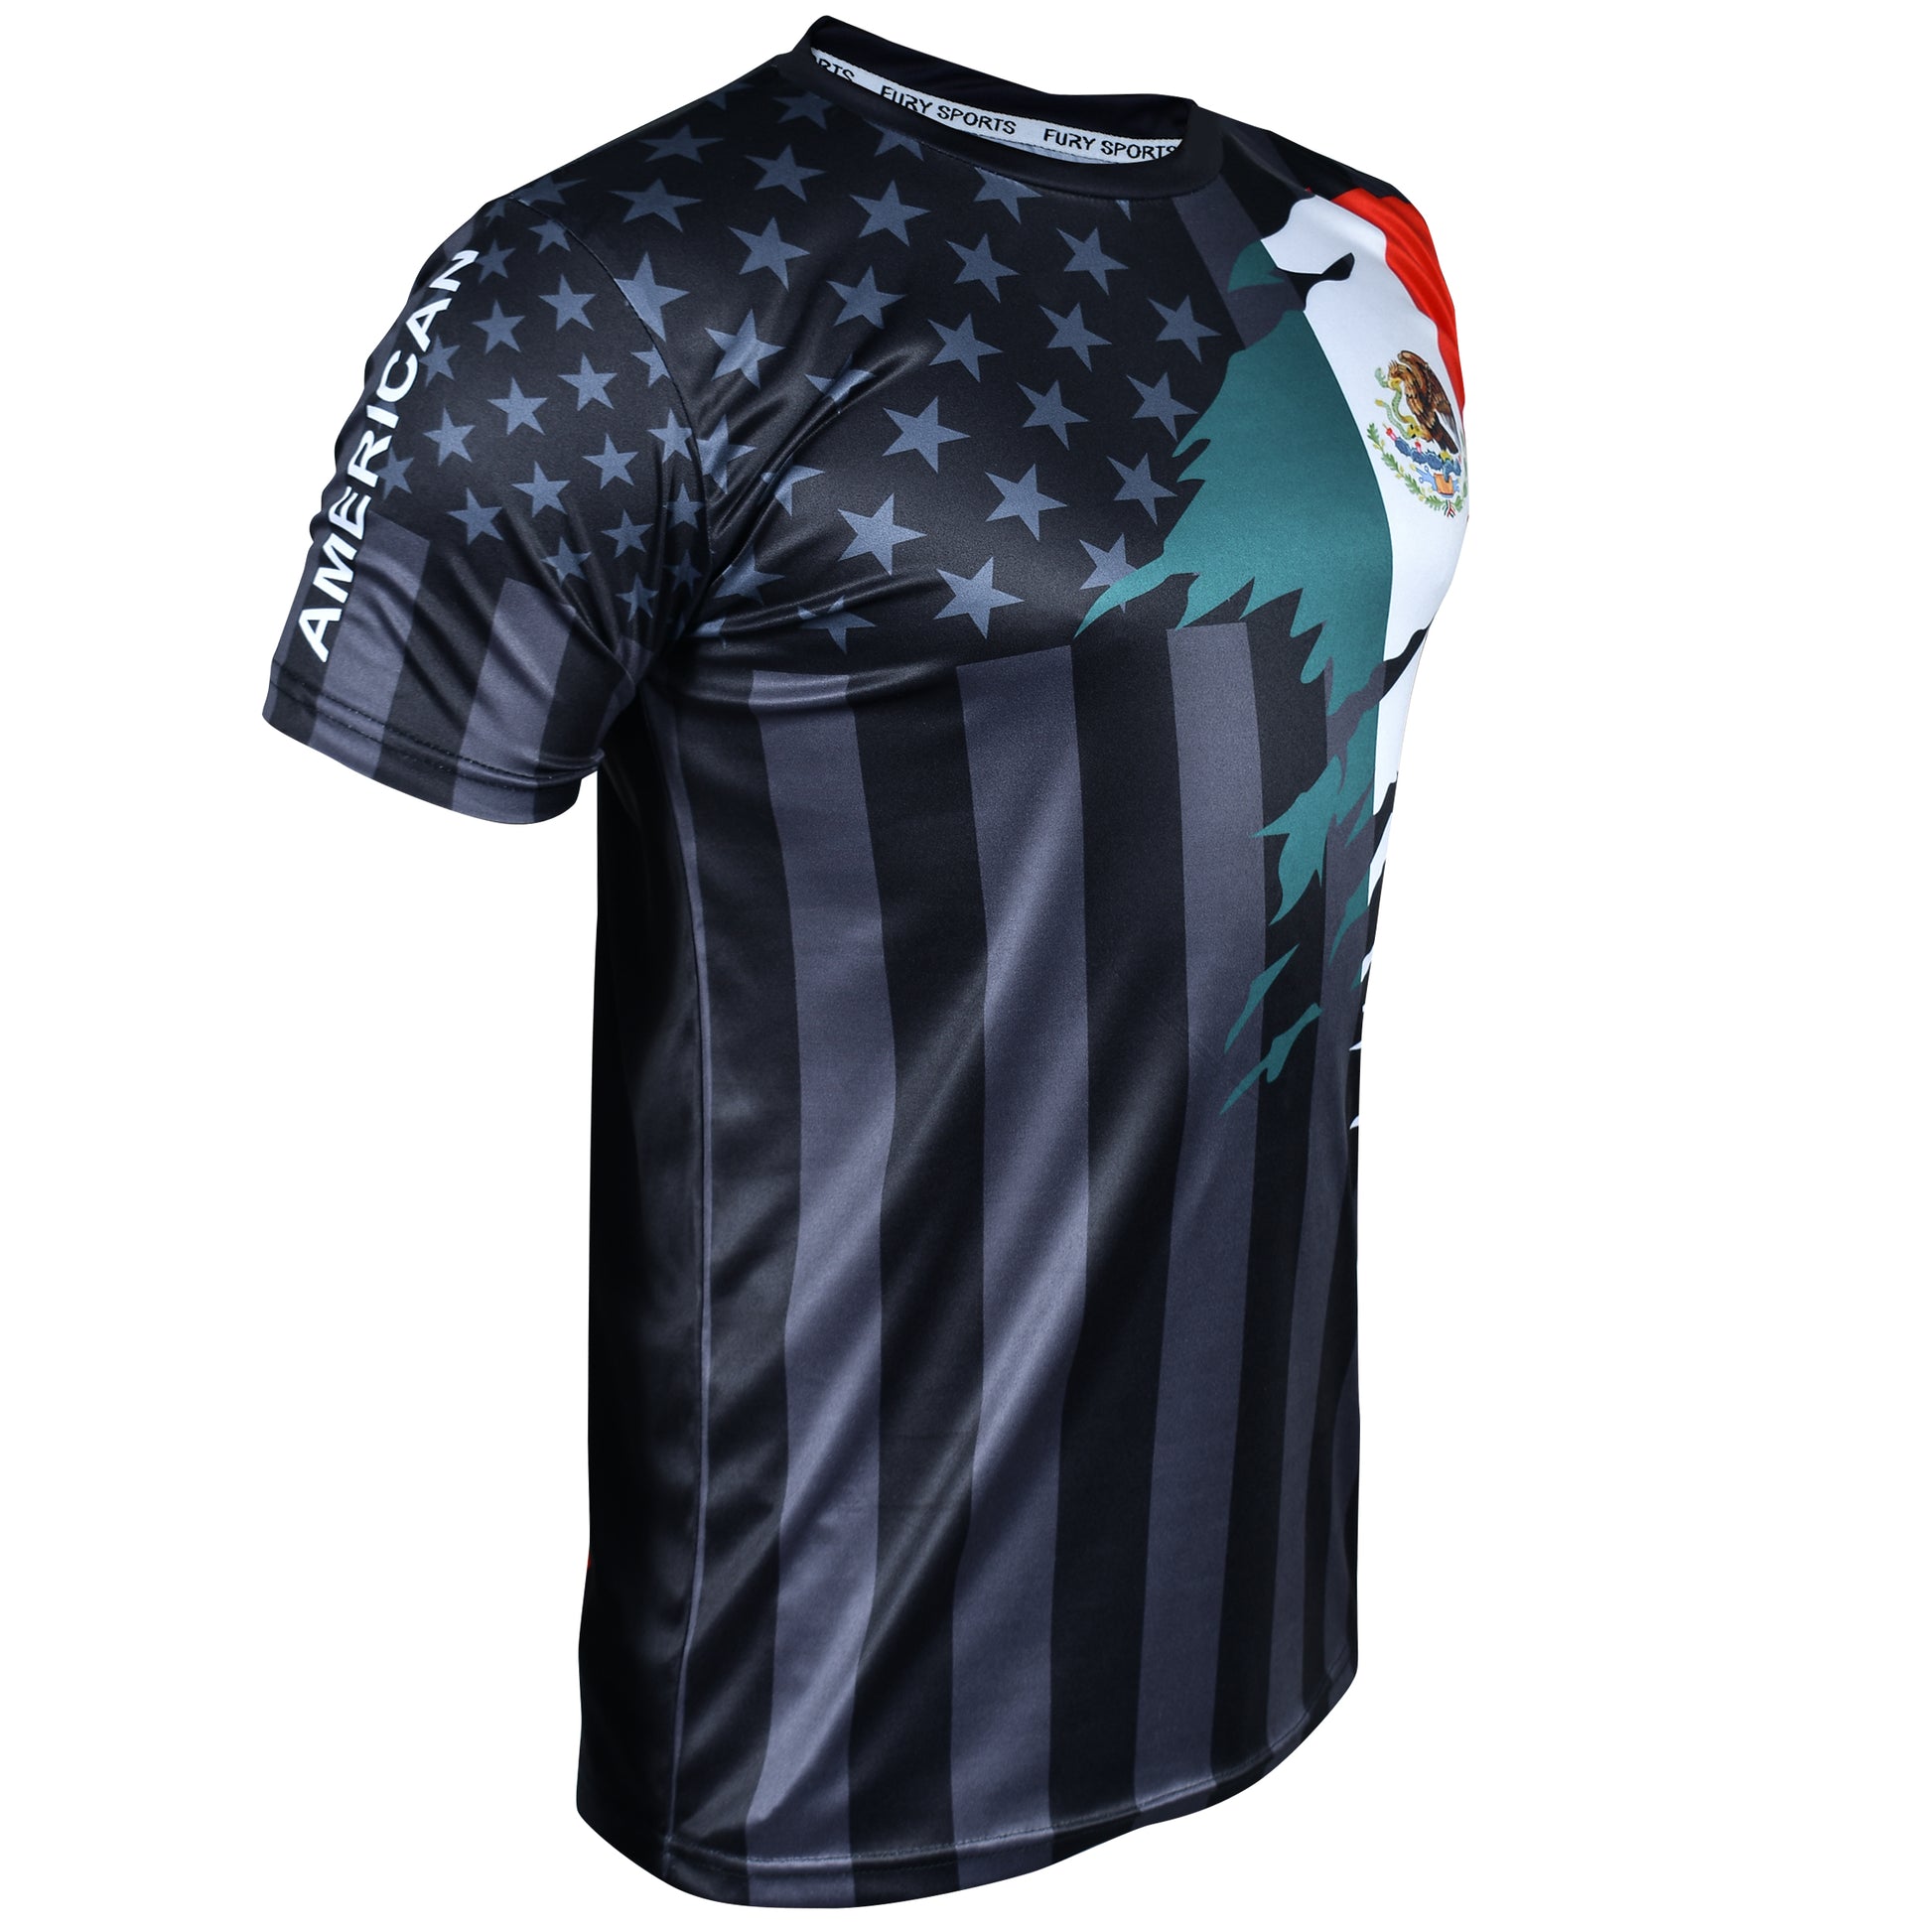  Fury Mexico and USA Flag Mix Soccer Jersey - Mexico